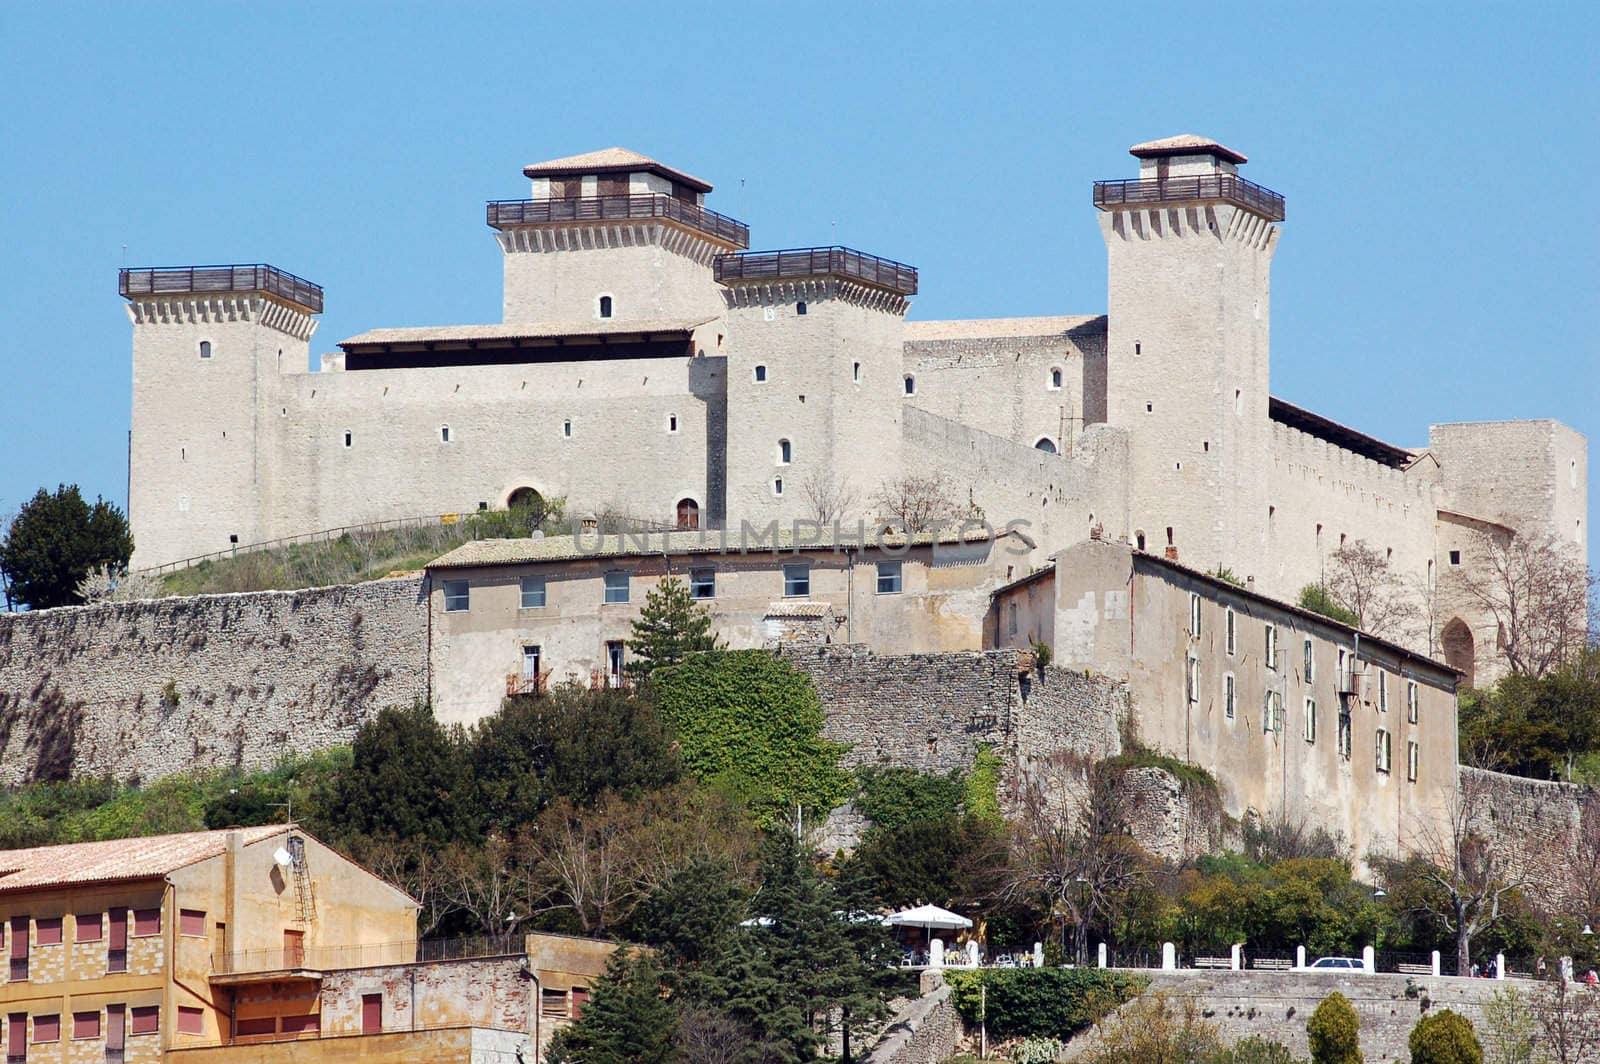 THE CASTLE OF SPOLETO - Best of Italy